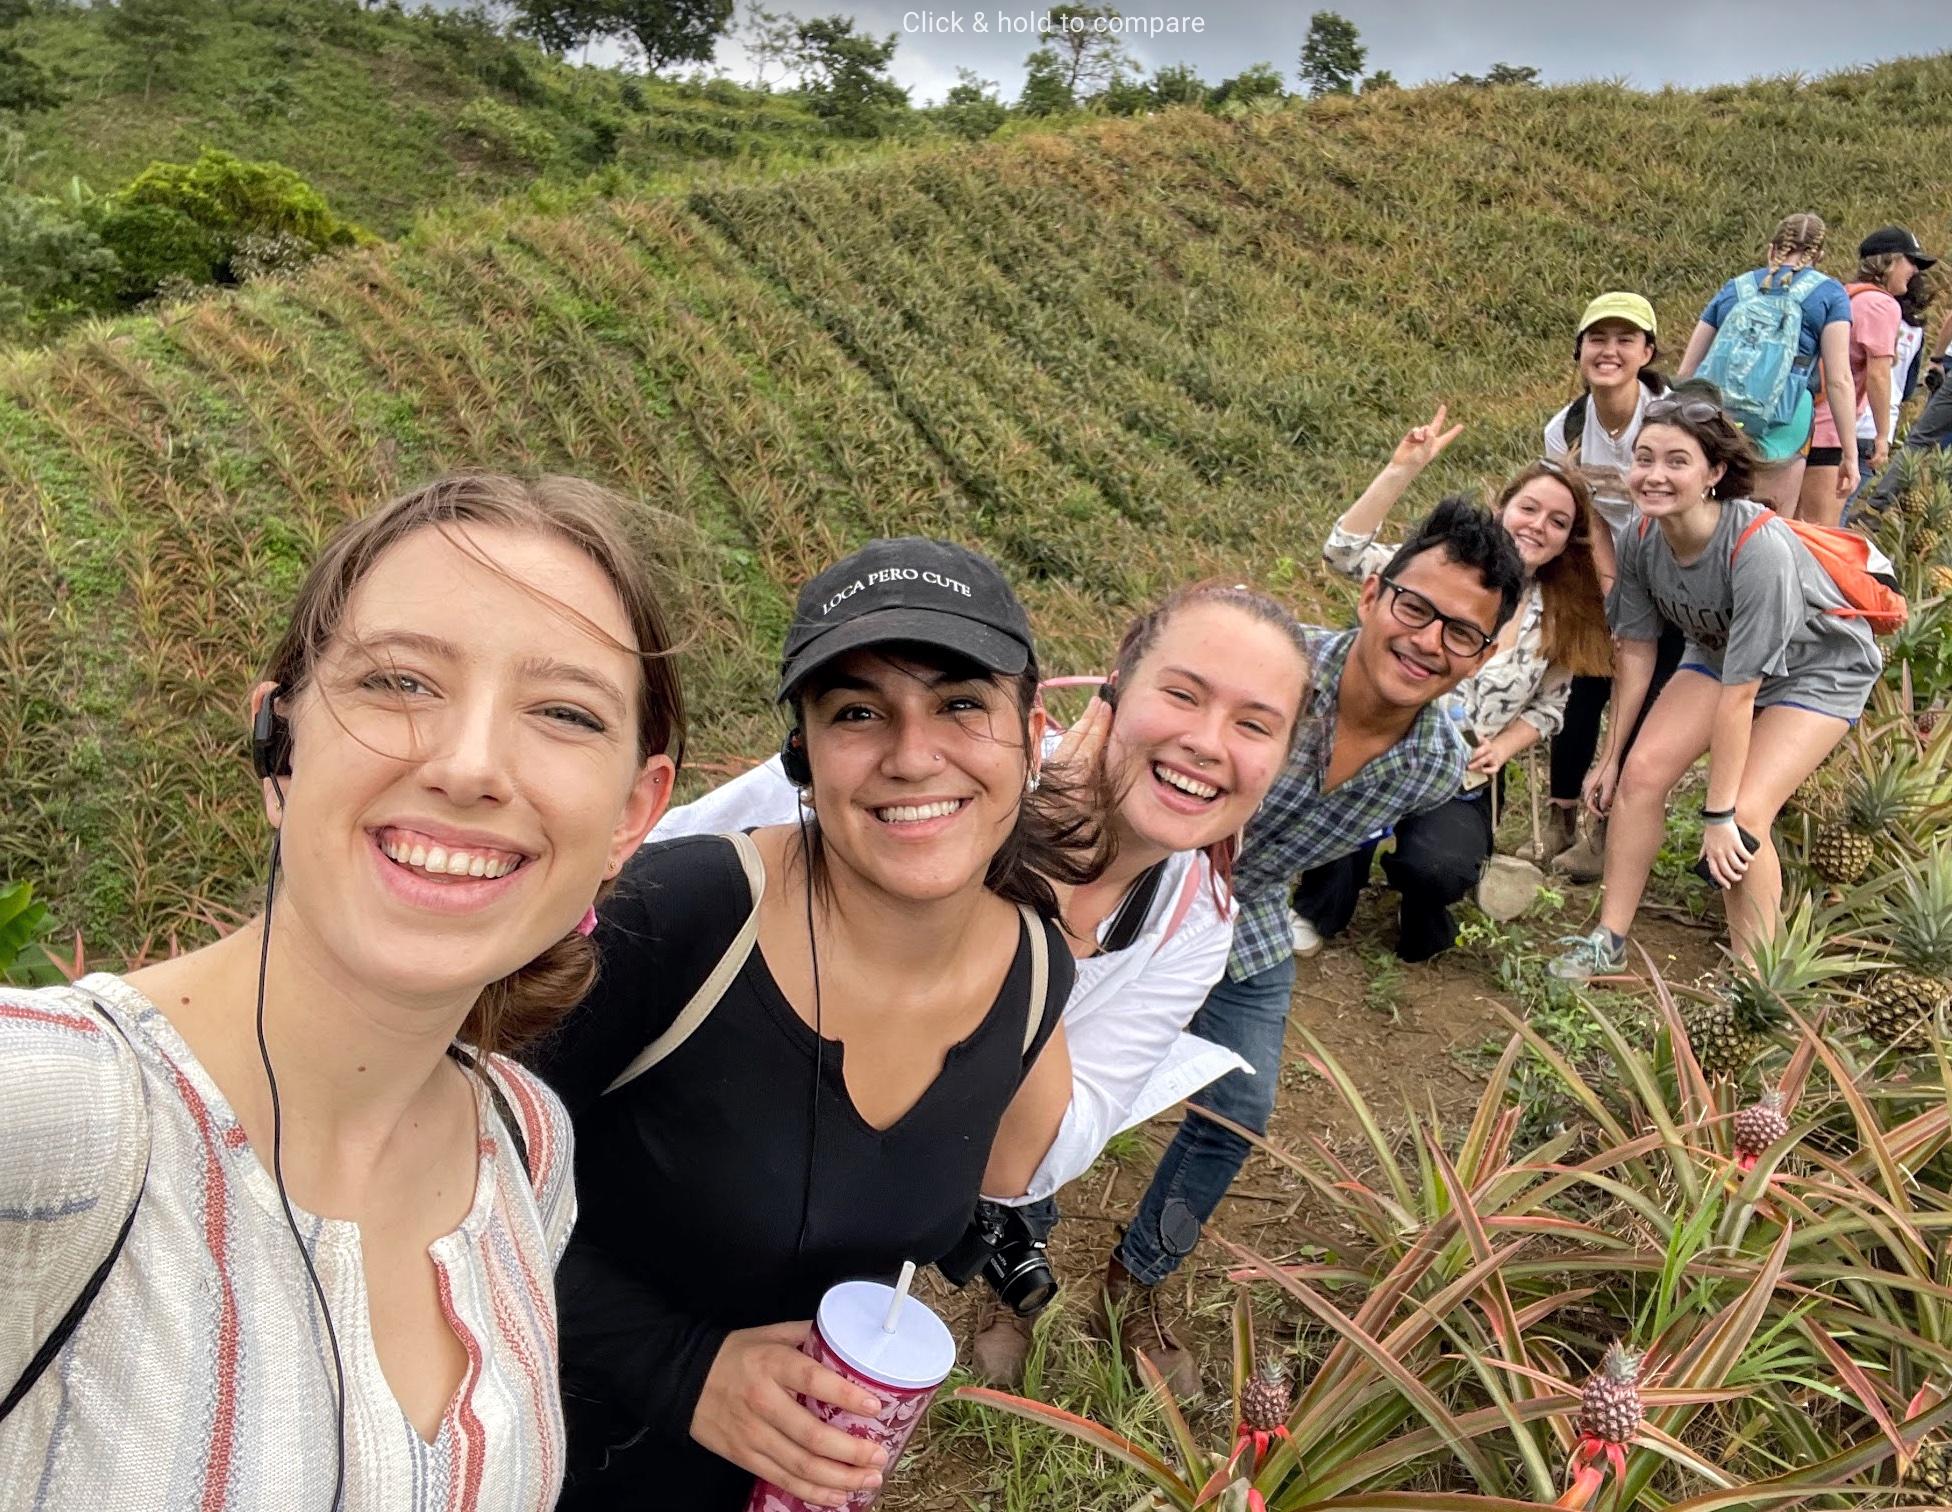 A group of seven UMD students walking down an path in a field pause for a selfie.